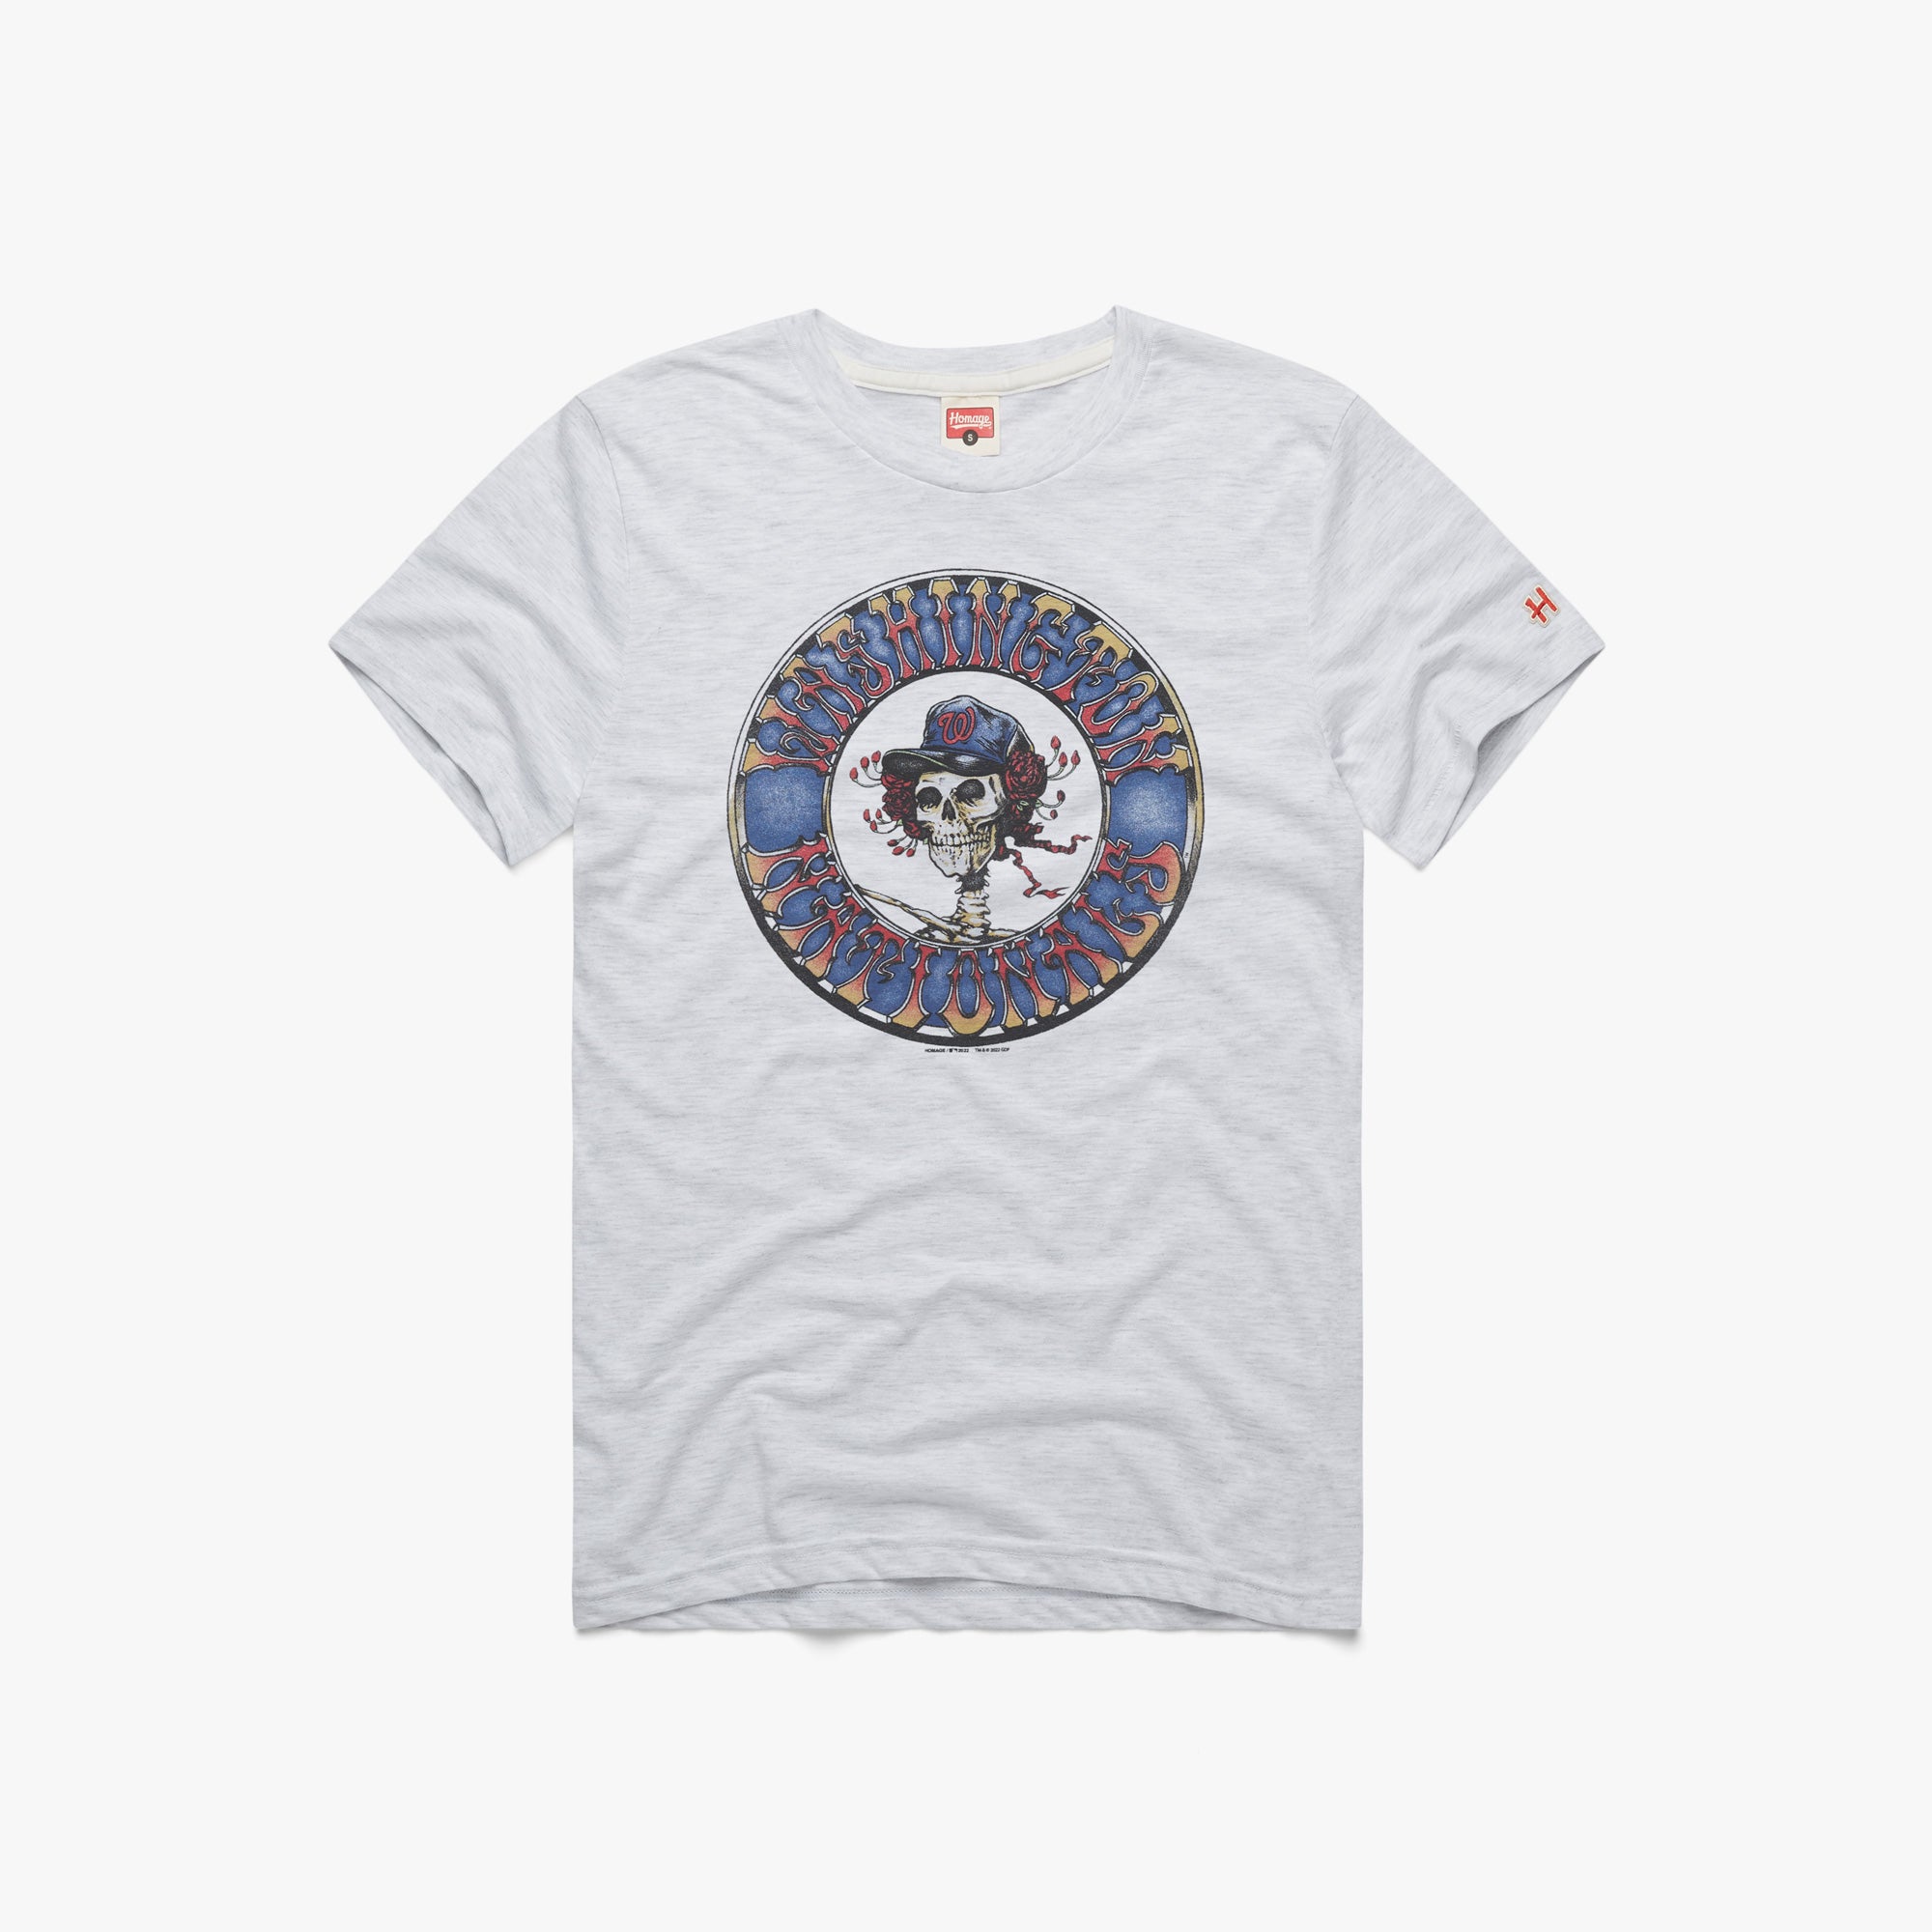 MLB x Grateful Dead x Cleveland Baseball T-Shirt from Homage. | Ash | Vintage Apparel from Homage.